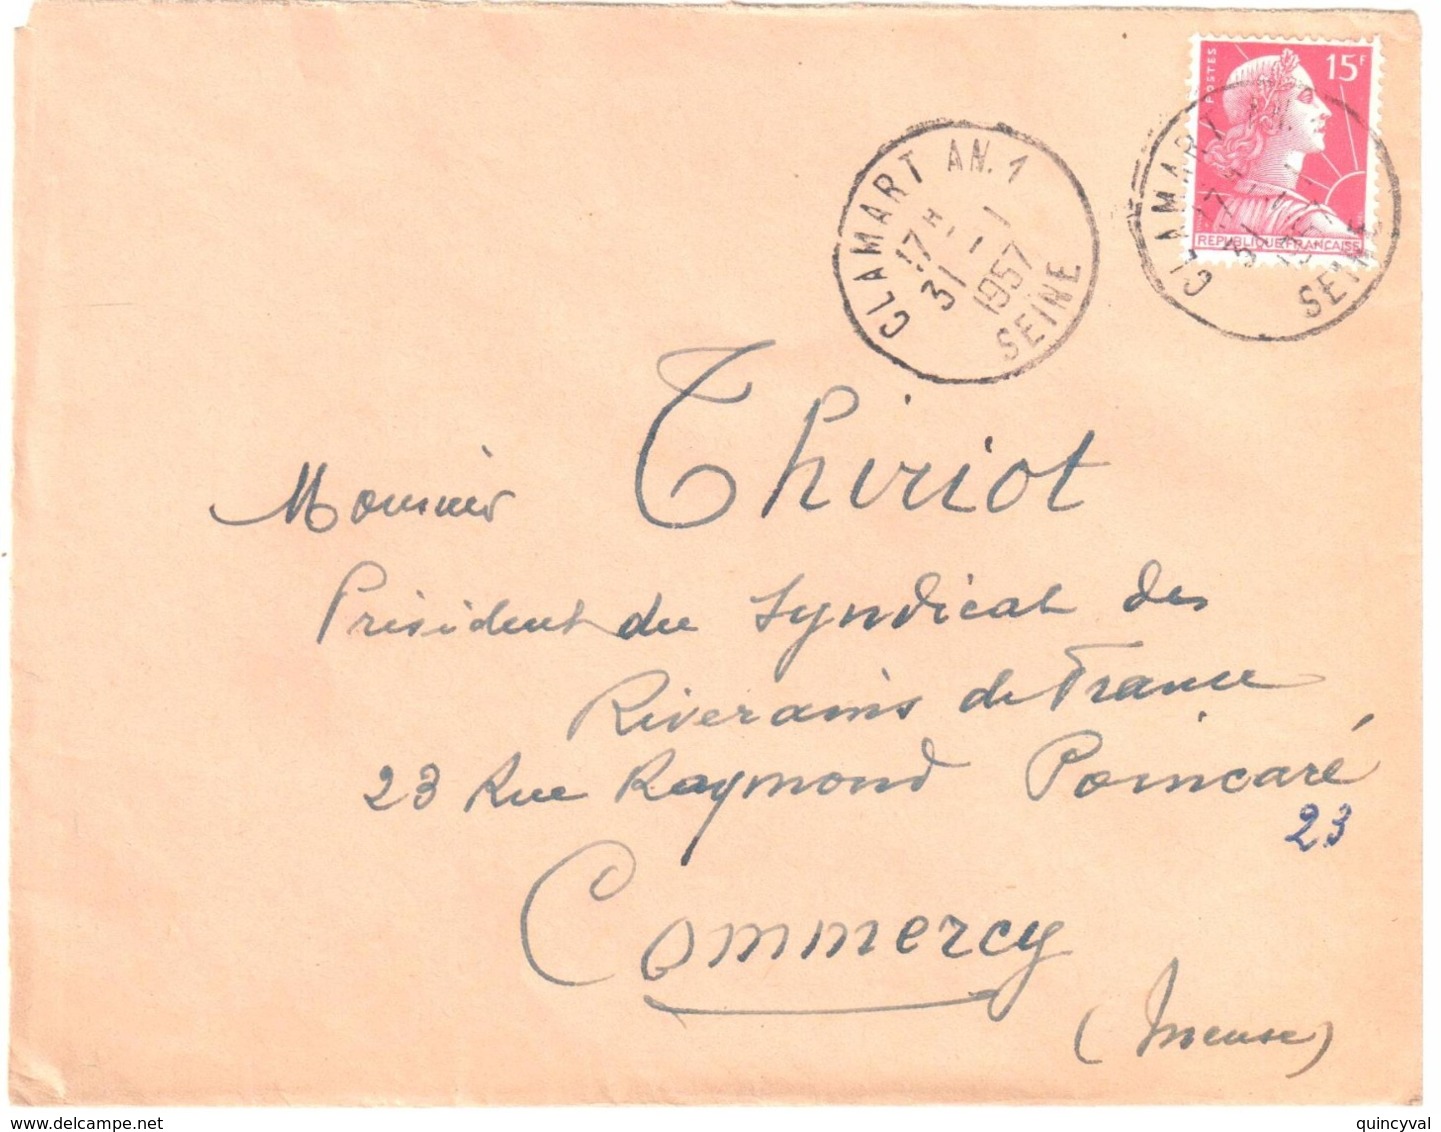 CLAMART AN.1 Seine Lettre 15F Muller Rouge Yv 1011 Ob 31 1 1957 Type A9 Dest Commercy Meuse - Storia Postale